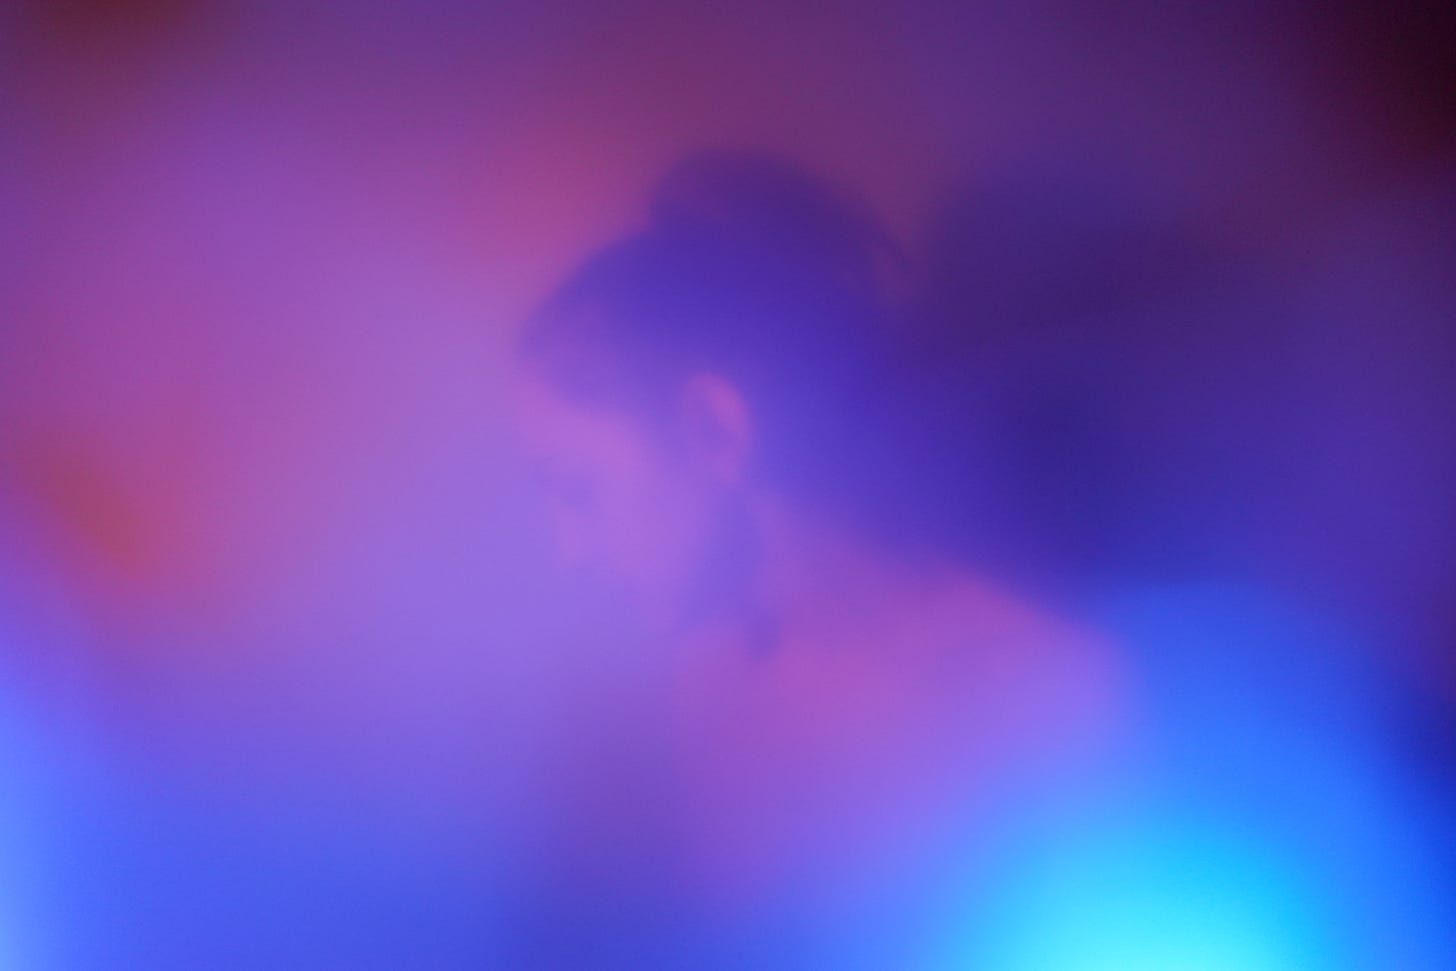 Portrait of a person (me) mostly obscured by a dreamy haze of colored lights. The person has their hair in a topknot and is looking away from the camera. Their eyes are closed.